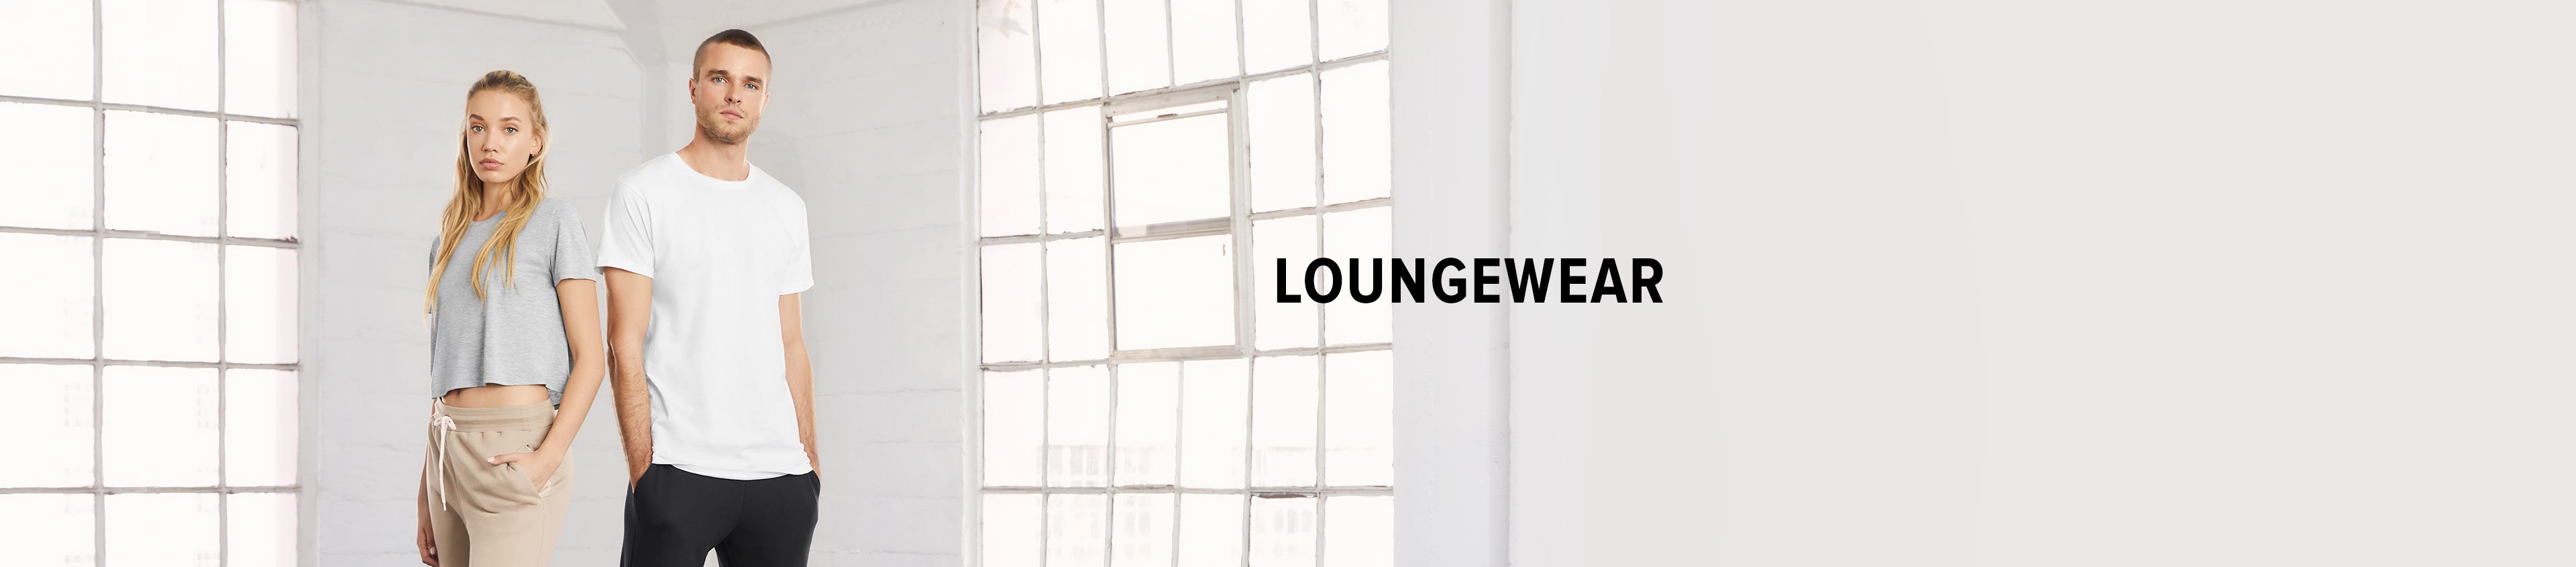 Unisex Loungewear Collection